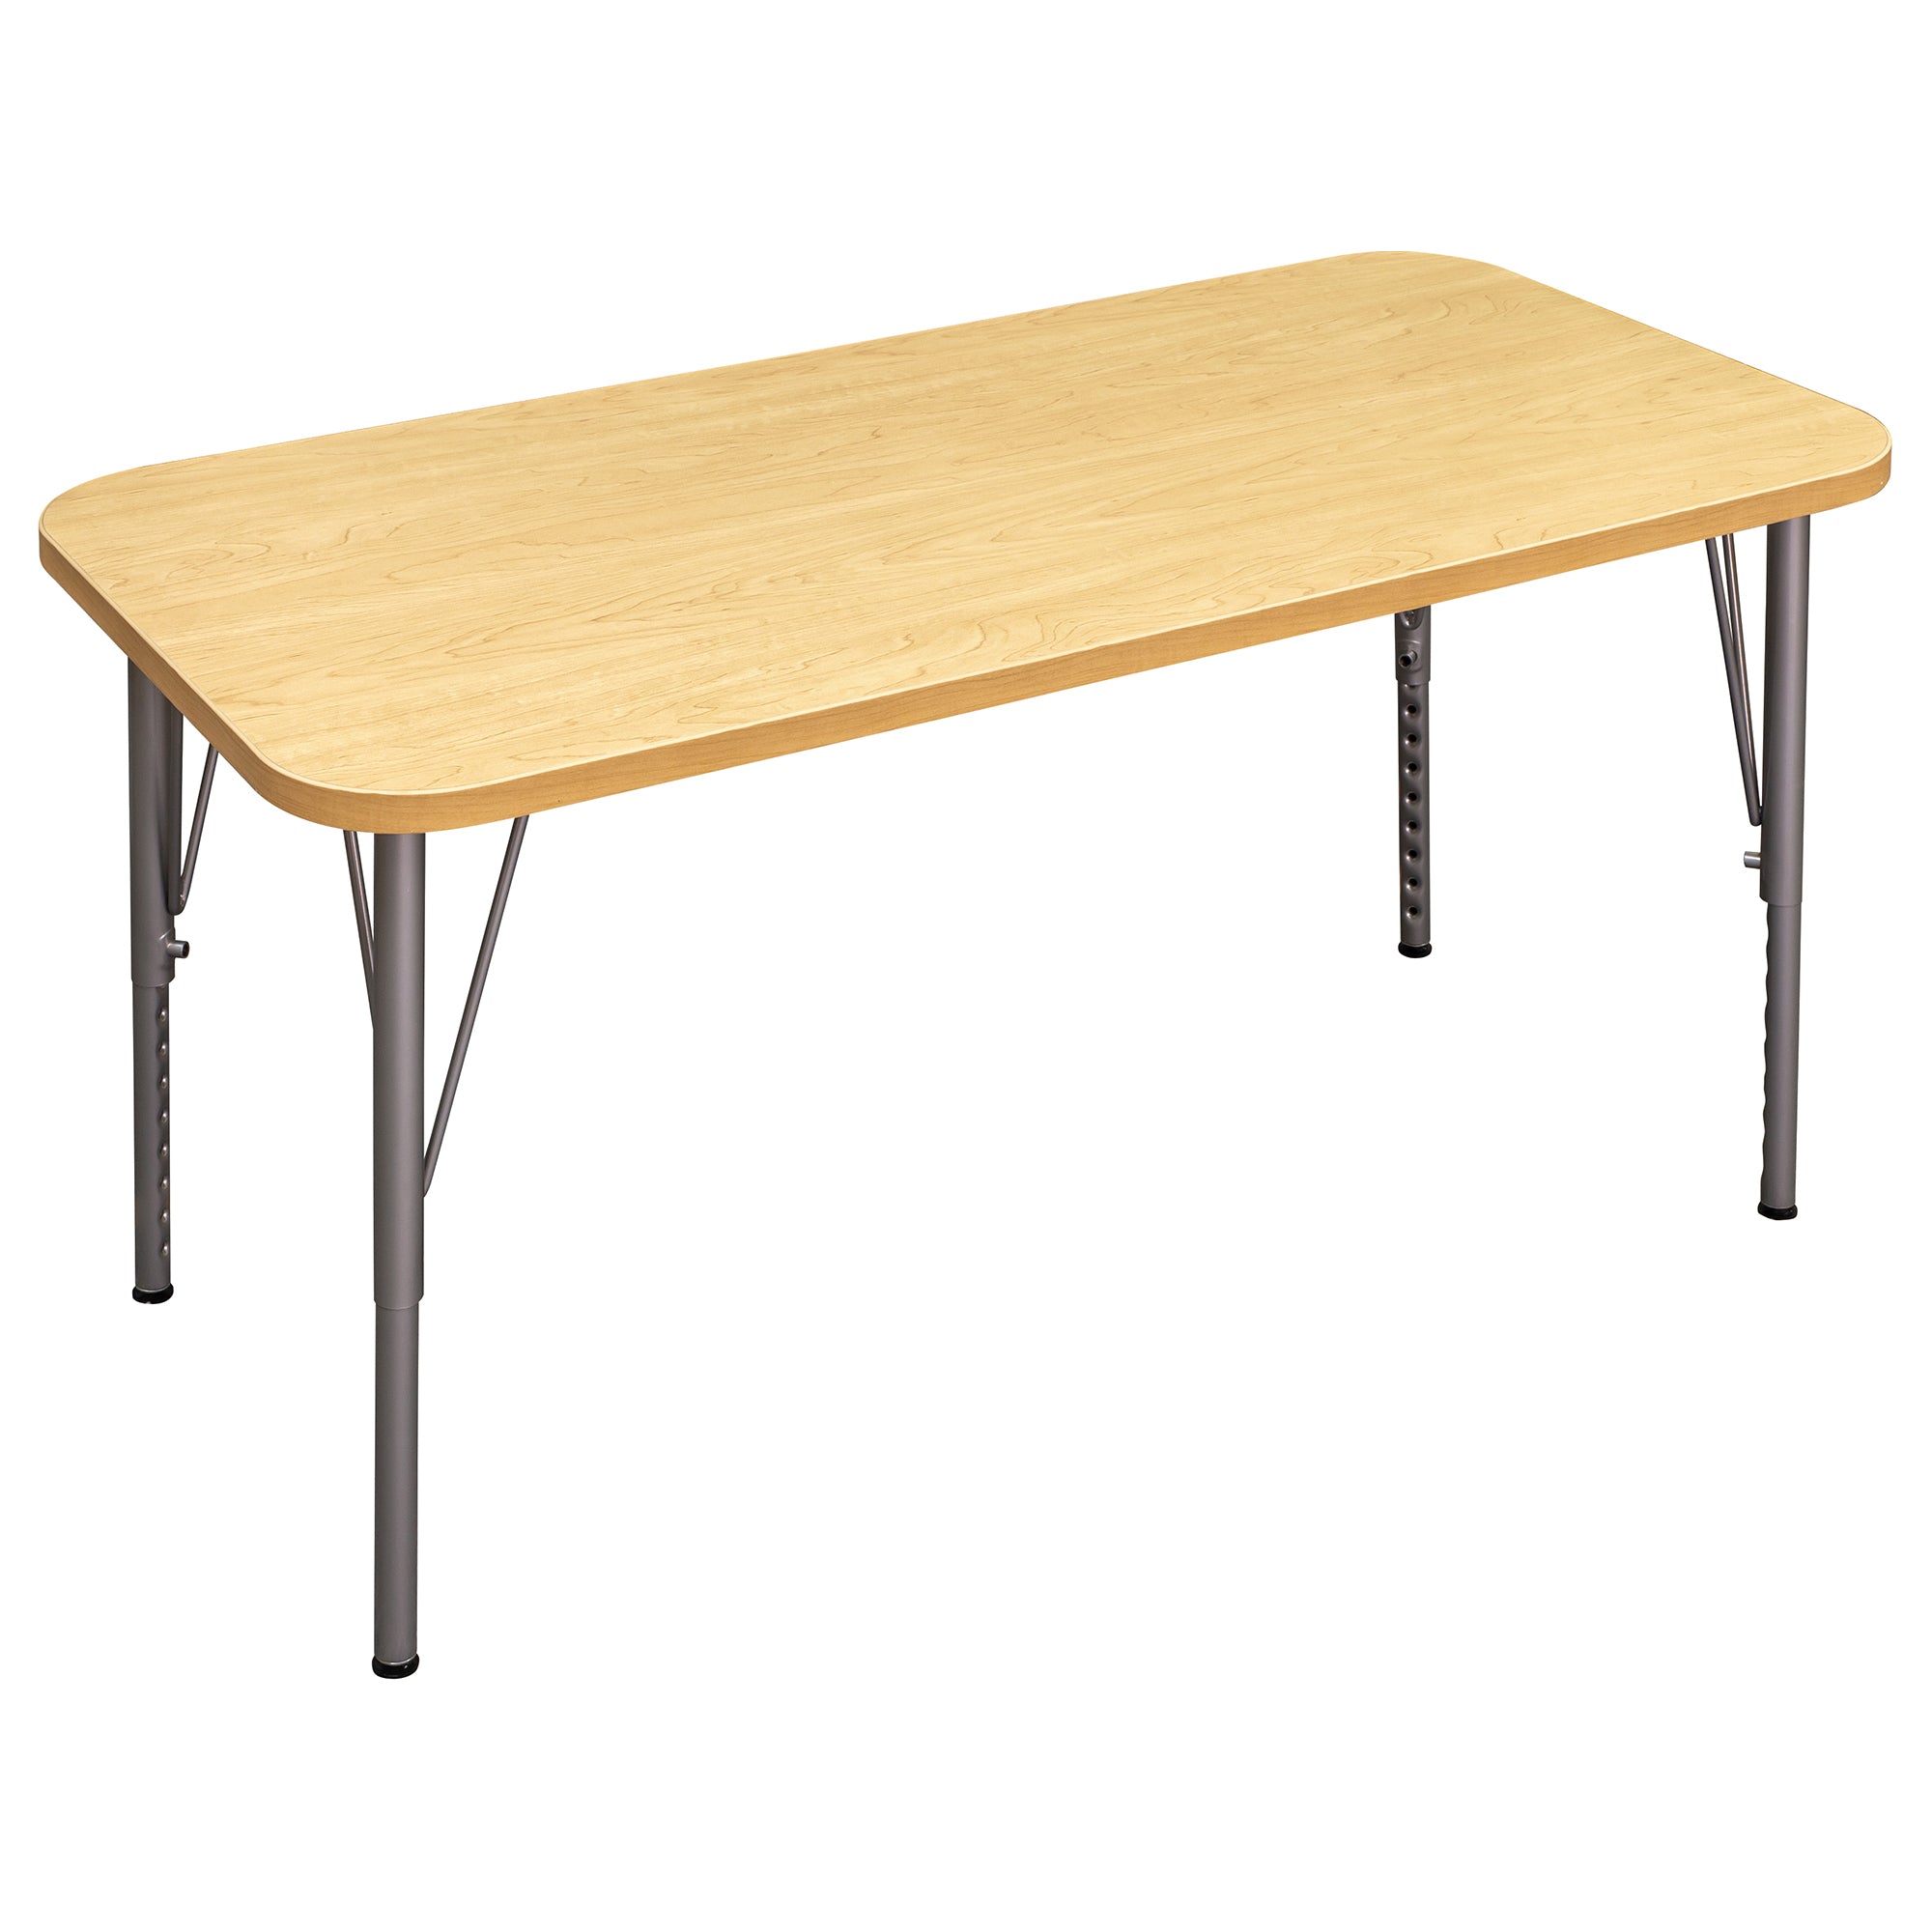 48 by 24 Rectangular Childs Table With Adjustable Height Legs